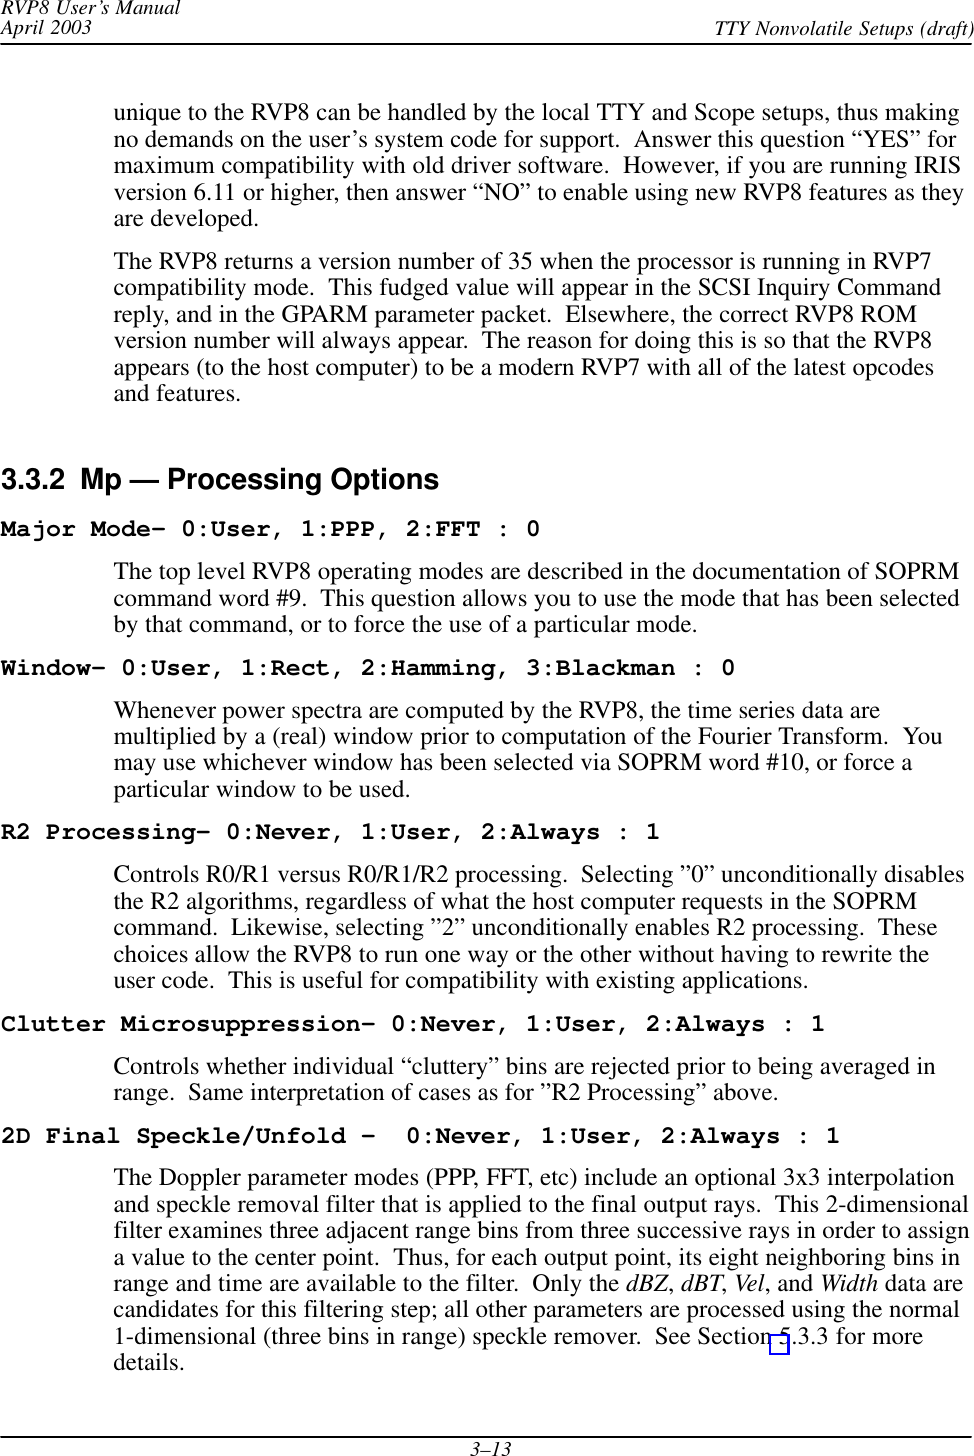 RVP8 User’s ManualApril 2003 TTY Nonvolatile Setups (draft)3–13unique to the RVP8 can be handled by the local TTY and Scope setups, thus makingno demands on the user’s system code for support.  Answer this question “YES” formaximum compatibility with old driver software.  However, if you are running IRISversion 6.11 or higher, then answer “NO” to enable using new RVP8 features as theyare developed.The RVP8 returns a version number of 35 when the processor is running in RVP7compatibility mode.  This fudged value will appear in the SCSI Inquiry Commandreply, and in the GPARM parameter packet.  Elsewhere, the correct RVP8 ROMversion number will always appear.  The reason for doing this is so that the RVP8appears (to the host computer) to be a modern RVP7 with all of the latest opcodesand features.3.3.2  Mp — Processing OptionsMajor Mode- 0:User, 1:PPP, 2:FFT : 0The top level RVP8 operating modes are described in the documentation of SOPRMcommand word #9.  This question allows you to use the mode that has been selectedby that command, or to force the use of a particular mode.Window- 0:User, 1:Rect, 2:Hamming, 3:Blackman : 0Whenever power spectra are computed by the RVP8, the time series data aremultiplied by a (real) window prior to computation of the Fourier Transform.  Youmay use whichever window has been selected via SOPRM word #10, or force aparticular window to be used.R2 Processing- 0:Never, 1:User, 2:Always : 1Controls R0/R1 versus R0/R1/R2 processing.  Selecting ”0” unconditionally disablesthe R2 algorithms, regardless of what the host computer requests in the SOPRMcommand.  Likewise, selecting ”2” unconditionally enables R2 processing.  Thesechoices allow the RVP8 to run one way or the other without having to rewrite theuser code.  This is useful for compatibility with existing applications.Clutter Microsuppression- 0:Never, 1:User, 2:Always : 1Controls whether individual “cluttery” bins are rejected prior to being averaged inrange.  Same interpretation of cases as for ”R2 Processing” above.2D Final Speckle/Unfold –  0:Never, 1:User, 2:Always : 1The Doppler parameter modes (PPP, FFT, etc) include an optional 3x3 interpolationand speckle removal filter that is applied to the final output rays.  This 2-dimensionalfilter examines three adjacent range bins from three successive rays in order to assigna value to the center point.  Thus, for each output point, its eight neighboring bins inrange and time are available to the filter.  Only the dBZ, dBT, Vel, and Width data arecandidates for this filtering step; all other parameters are processed using the normal1-dimensional (three bins in range) speckle remover.  See Section 5.3.3 for moredetails.